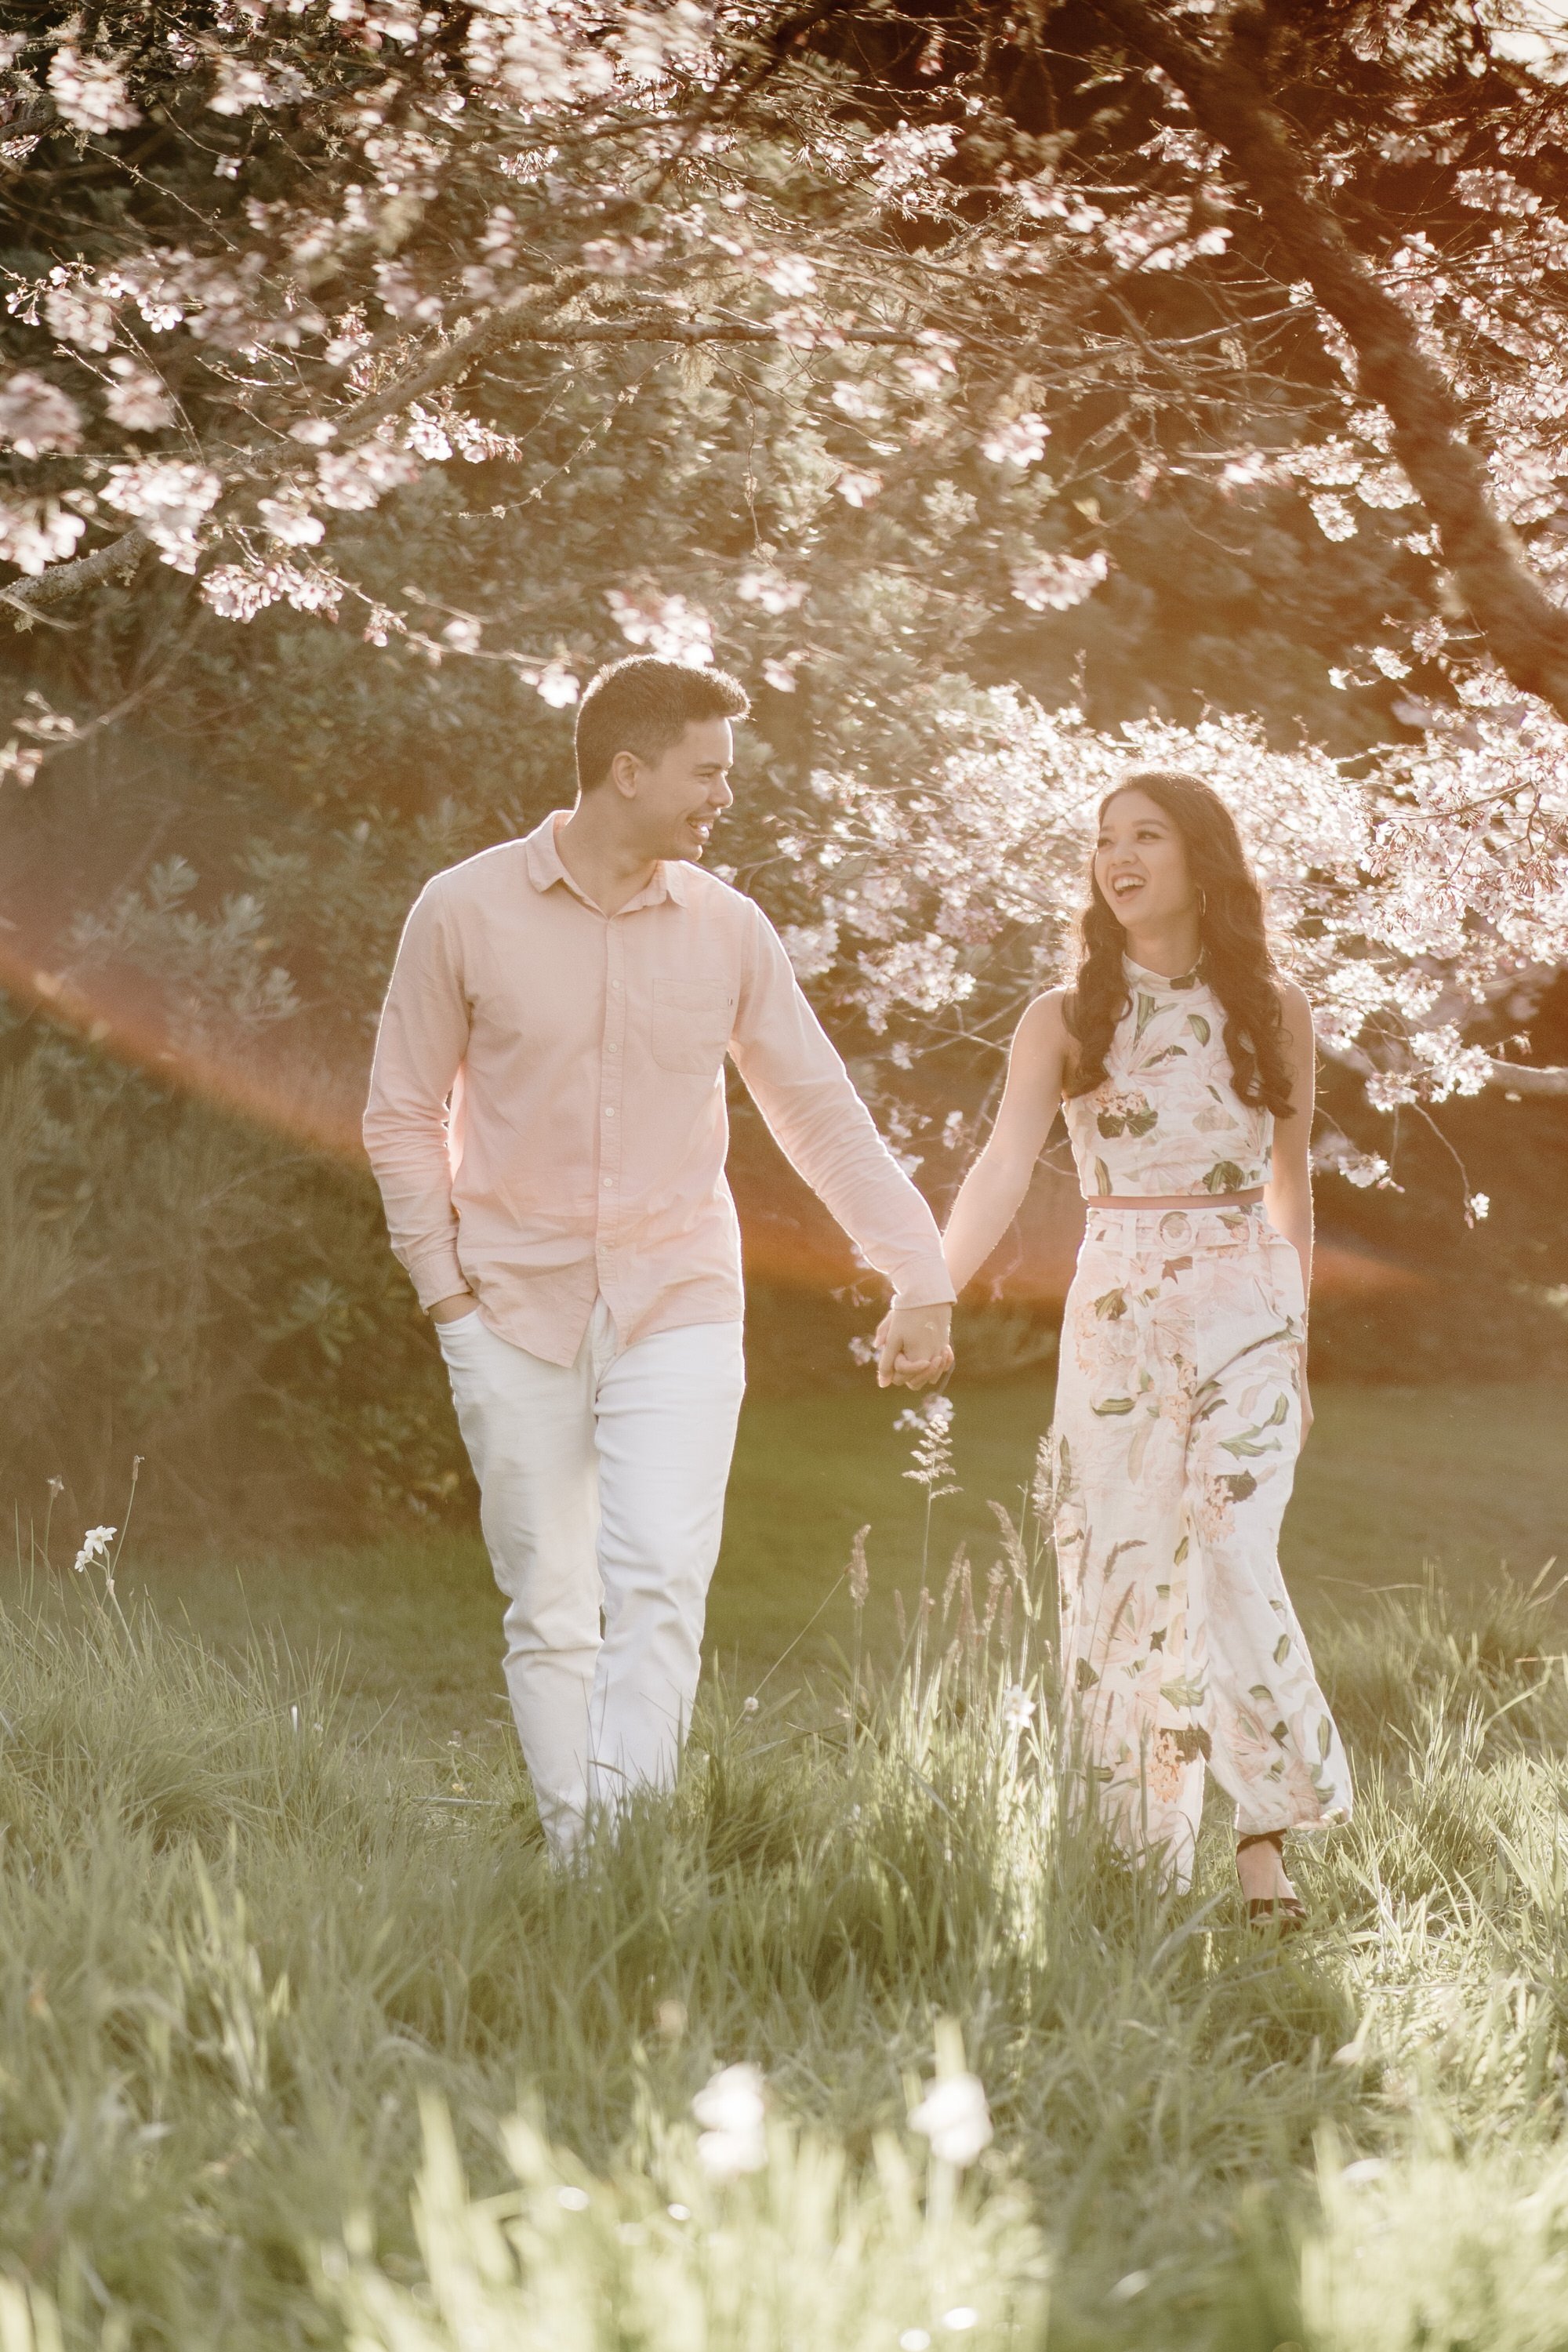 nate-and-thea-singers-duo-2023-top-auckland-wedding-phtographer-photography-videography-film-new-zealand-NZ-best-band-cherry-blossom-botanical-garden-engagement-elopement-dear-white-productions (68).jpg